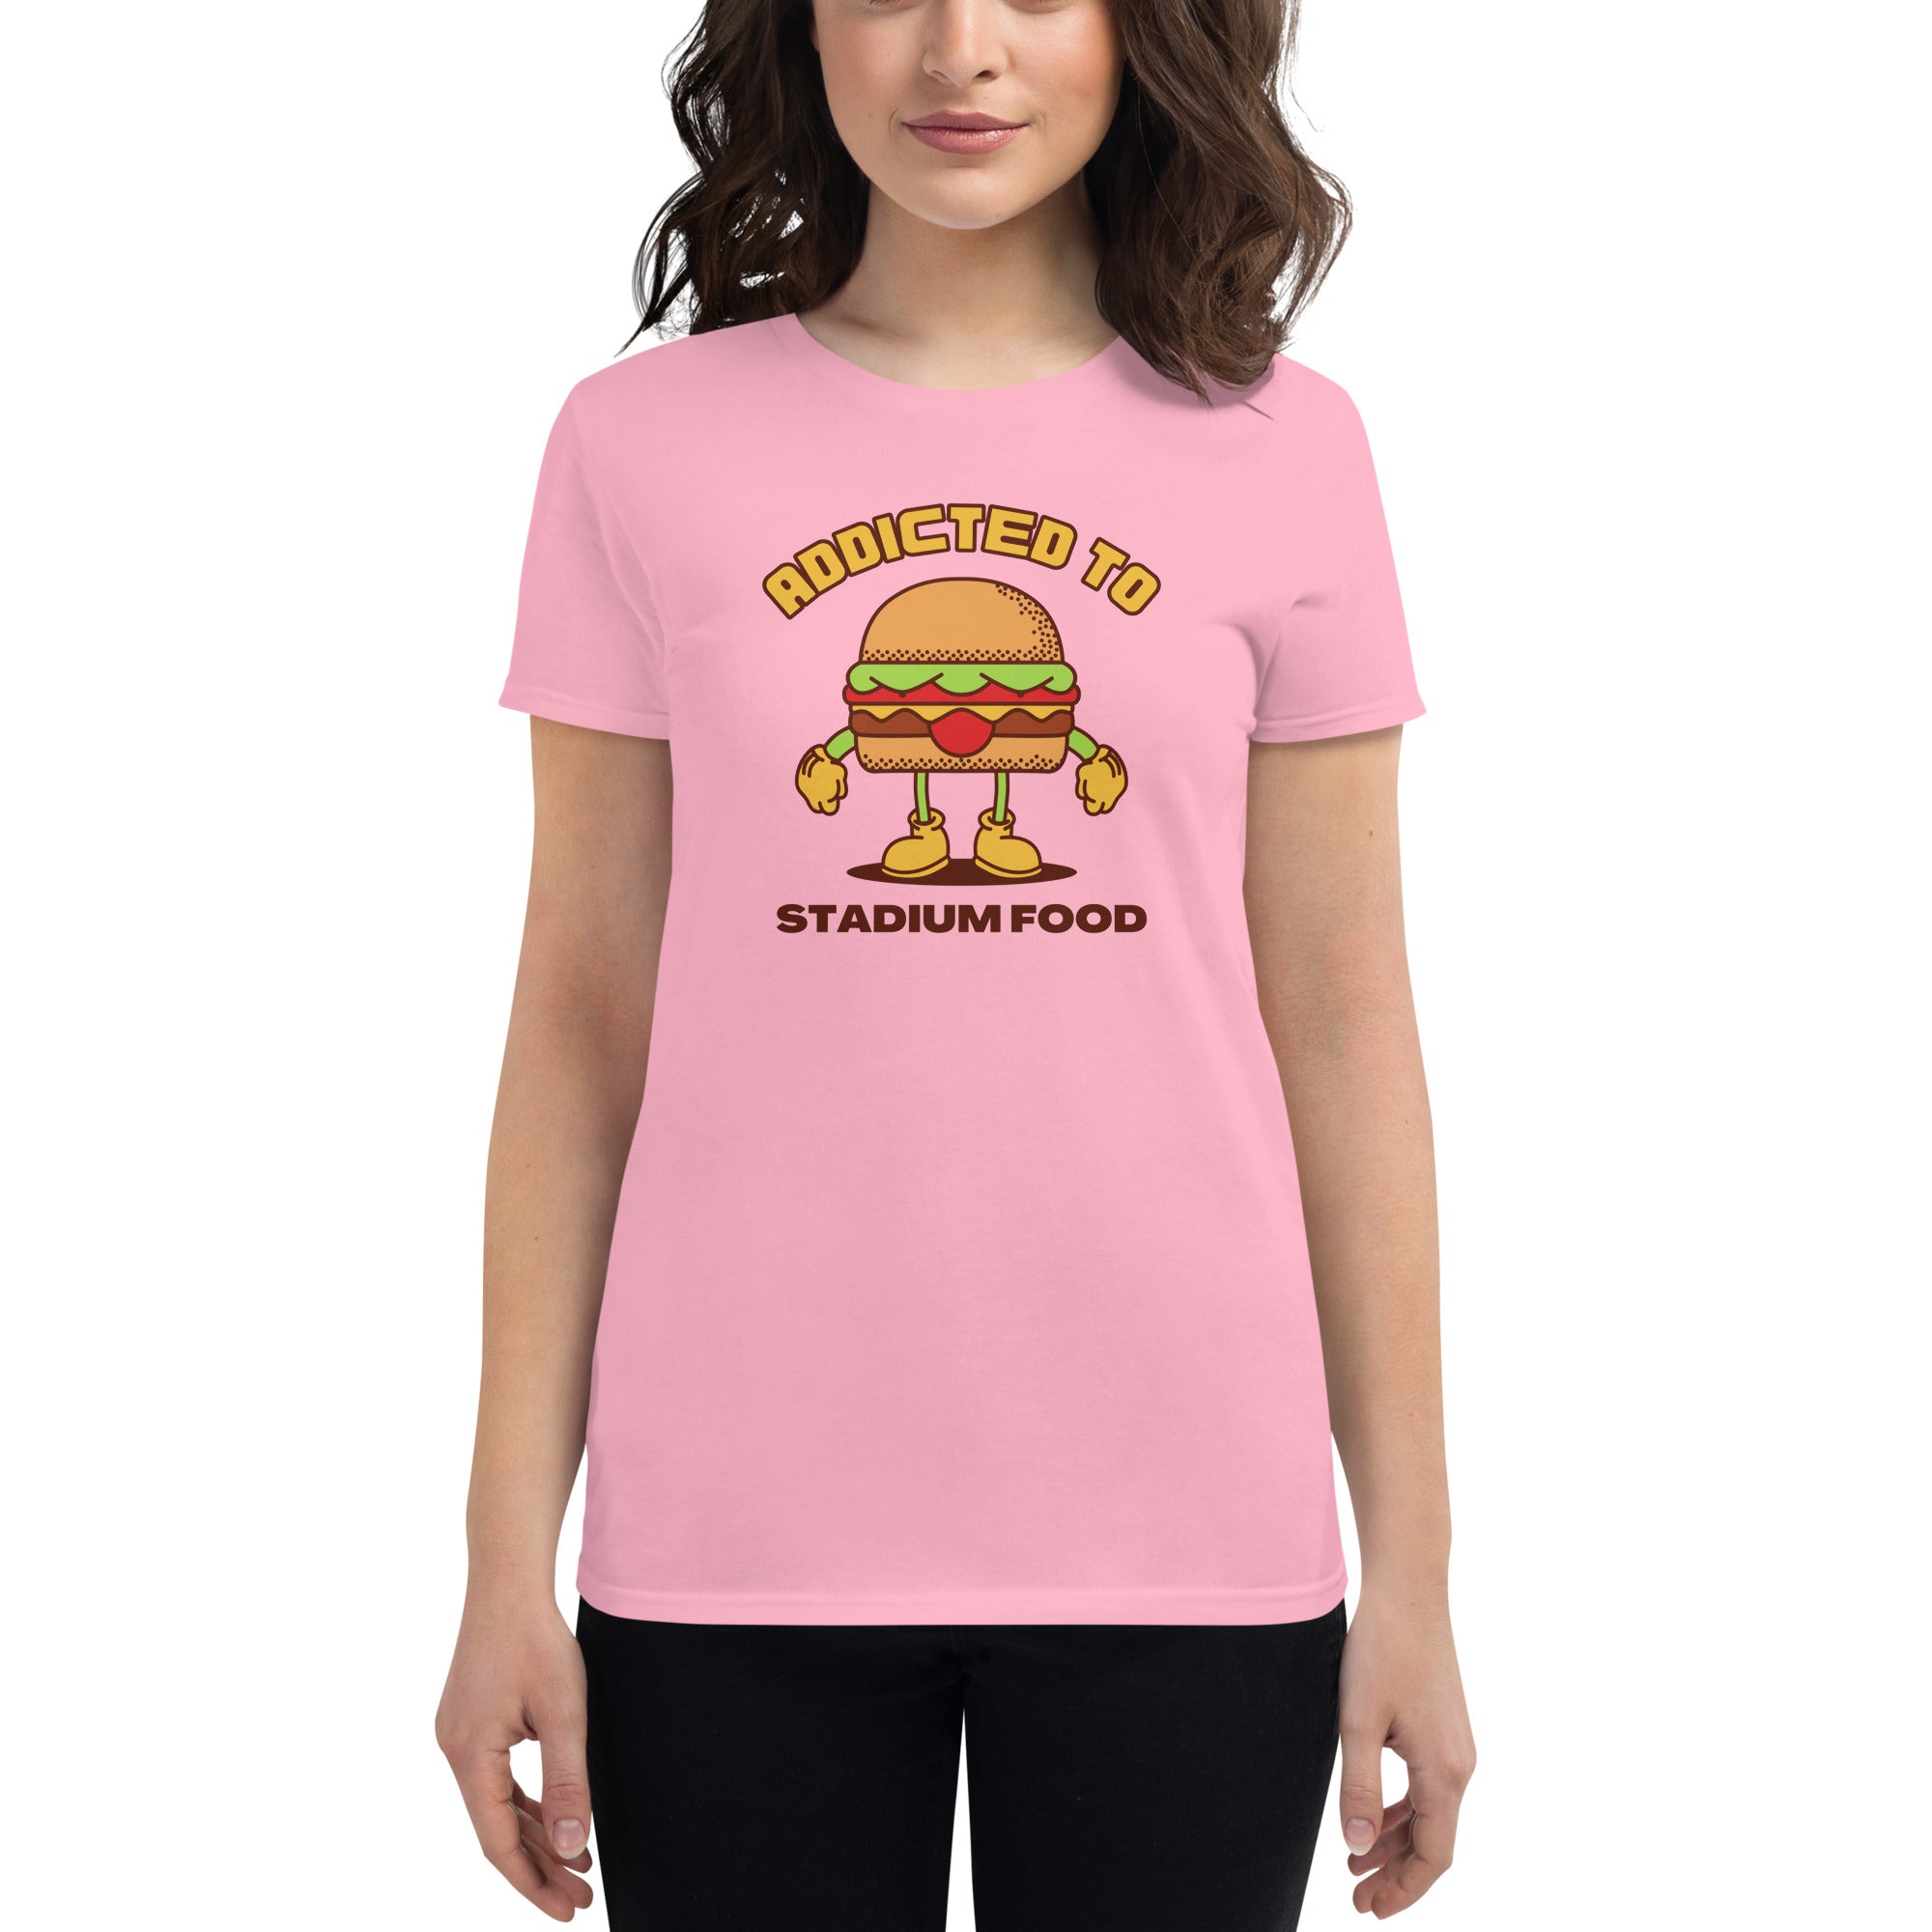 Addicted To Stadium Food Women's Fitted T-Shirt